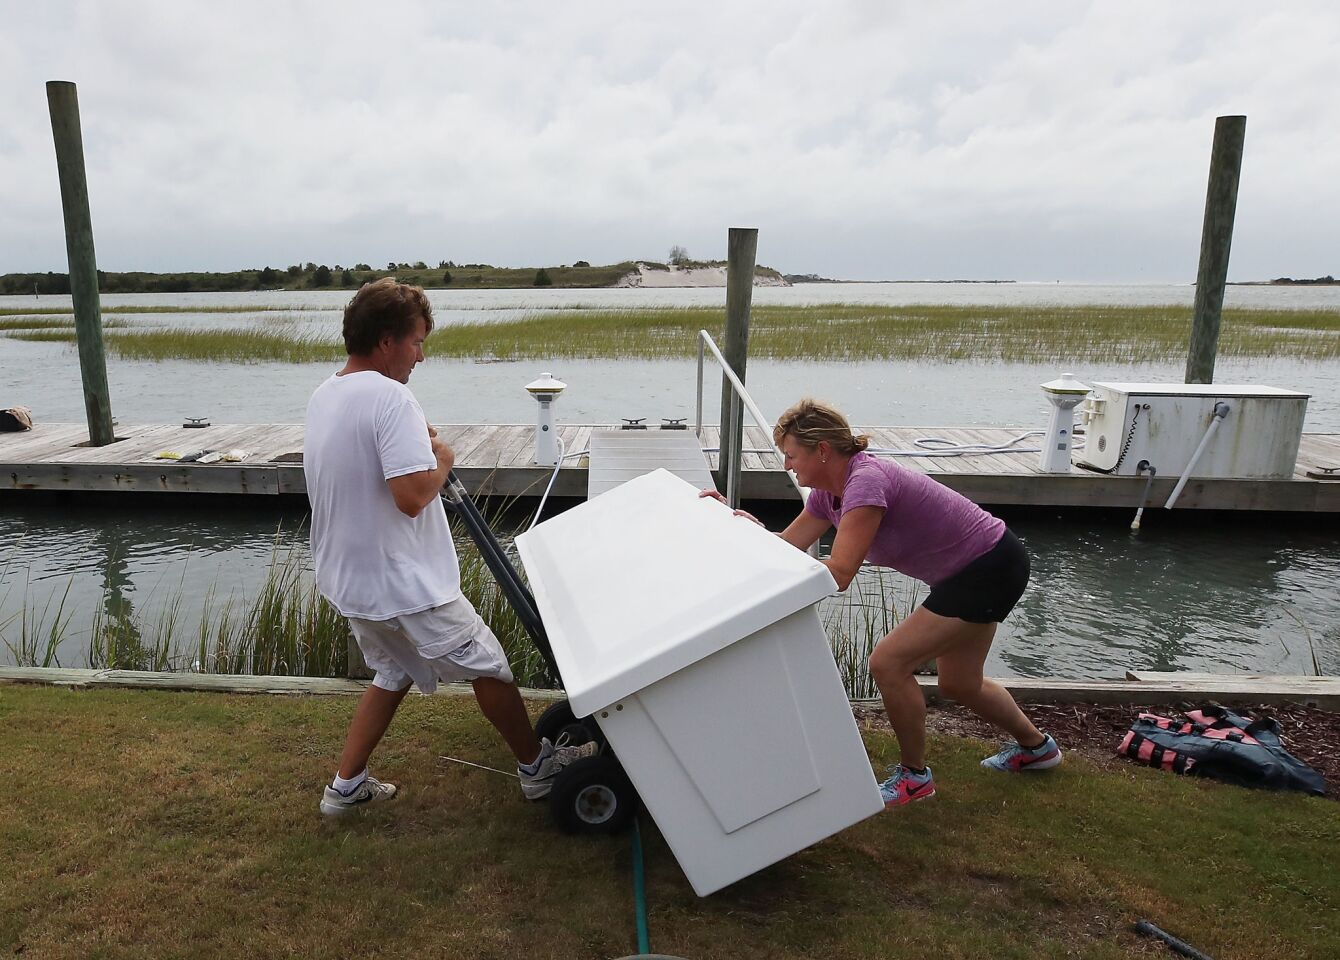 WILMINGTON, NC - SEPTEMBER 13: Mike Pollack and his wife Meredith Pollack move a dock box from their dock as Hurricane Florence approaches the area, on September 13, 2018 in Wilmington, North Carolina. Hurricane Florence is expected on early Friday possibly as a category 2 or 3 storm along the North Carolina and South Carolina coastline.